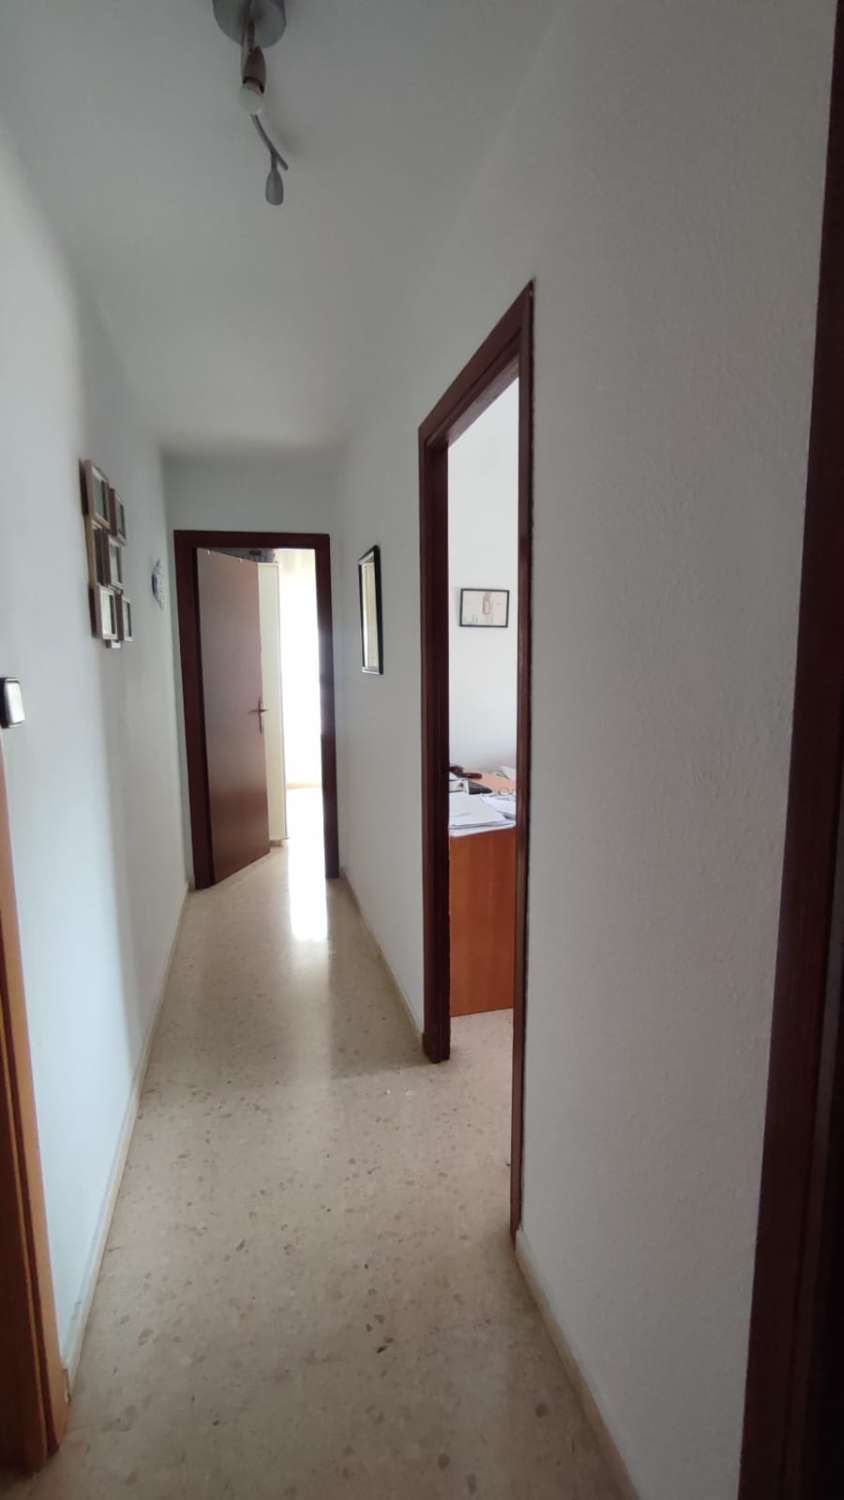 For sale apartment First line beach